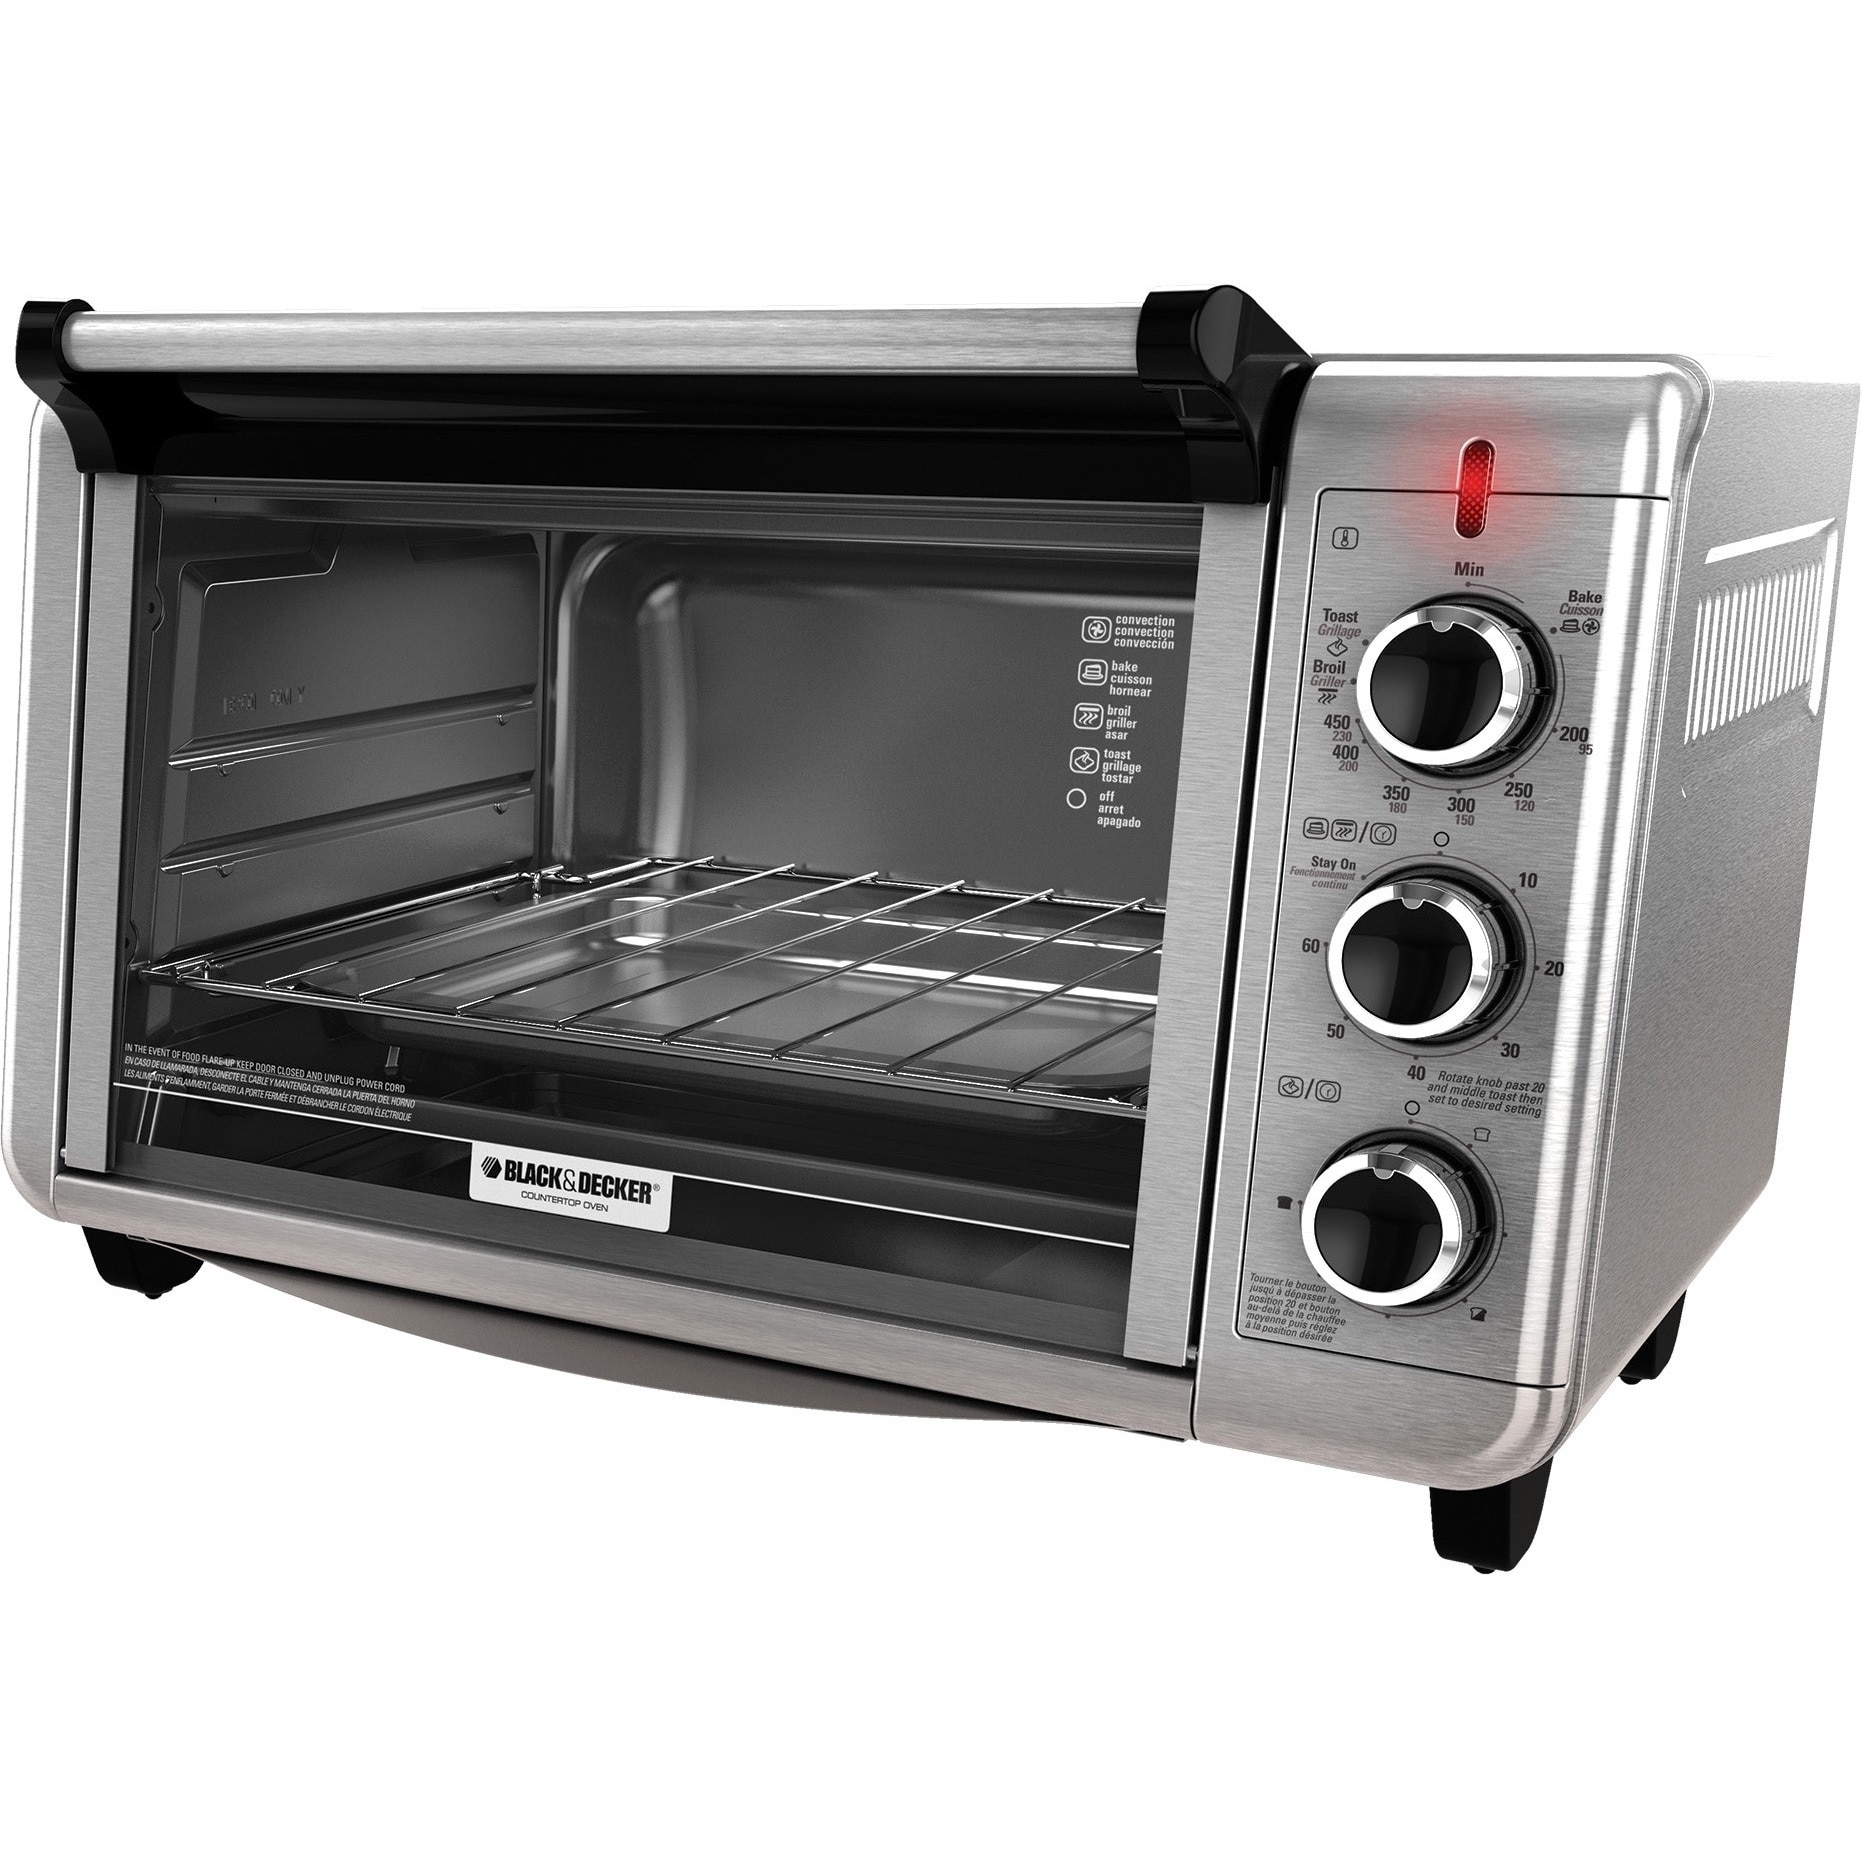 https://ak1.ostkcdn.com/images/products/30725296/Black-Decker-TO3210SSD-6-Slice-Counter-Top-Toaster-Oven-Silver-7401e035-1c3e-4a14-9bfb-39e311d36b5d.jpg